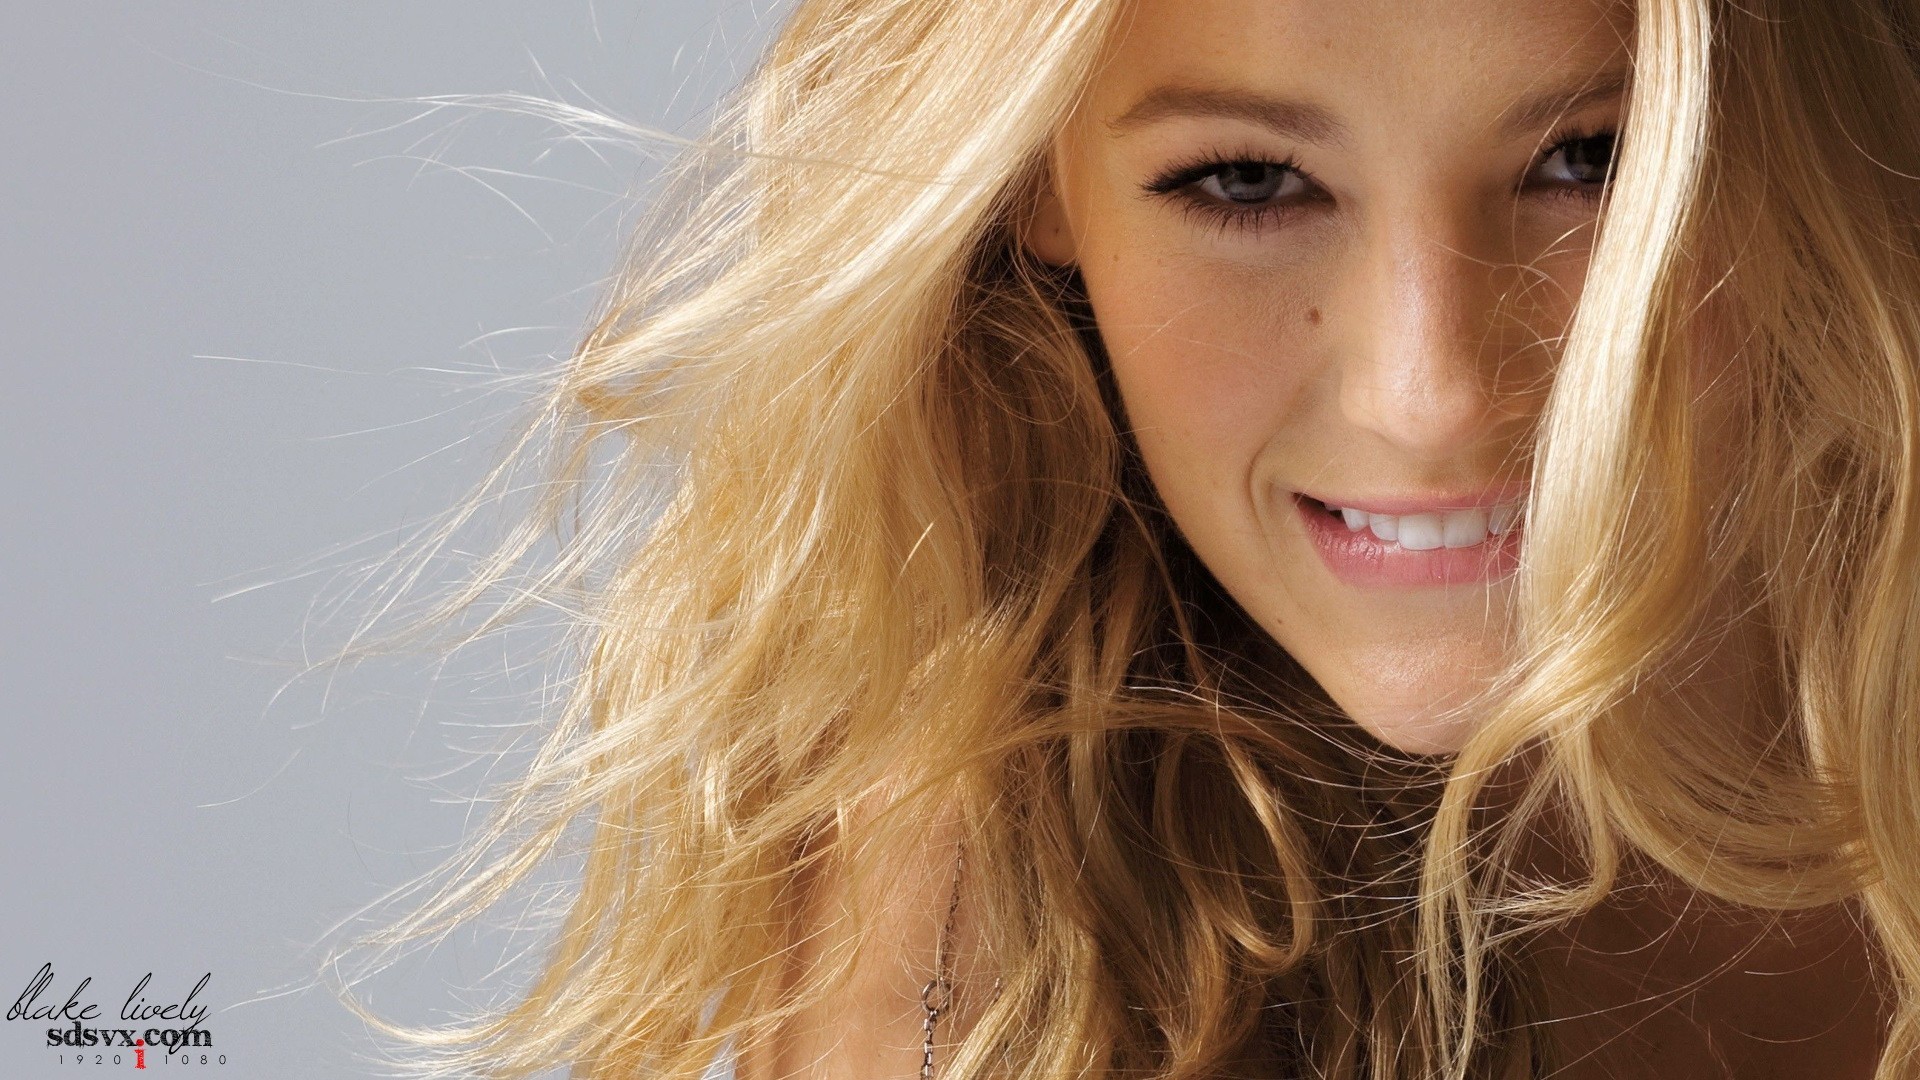 Blake Lively Blonde Face Curly Hair Biting Lip Women Wallpapers Hd